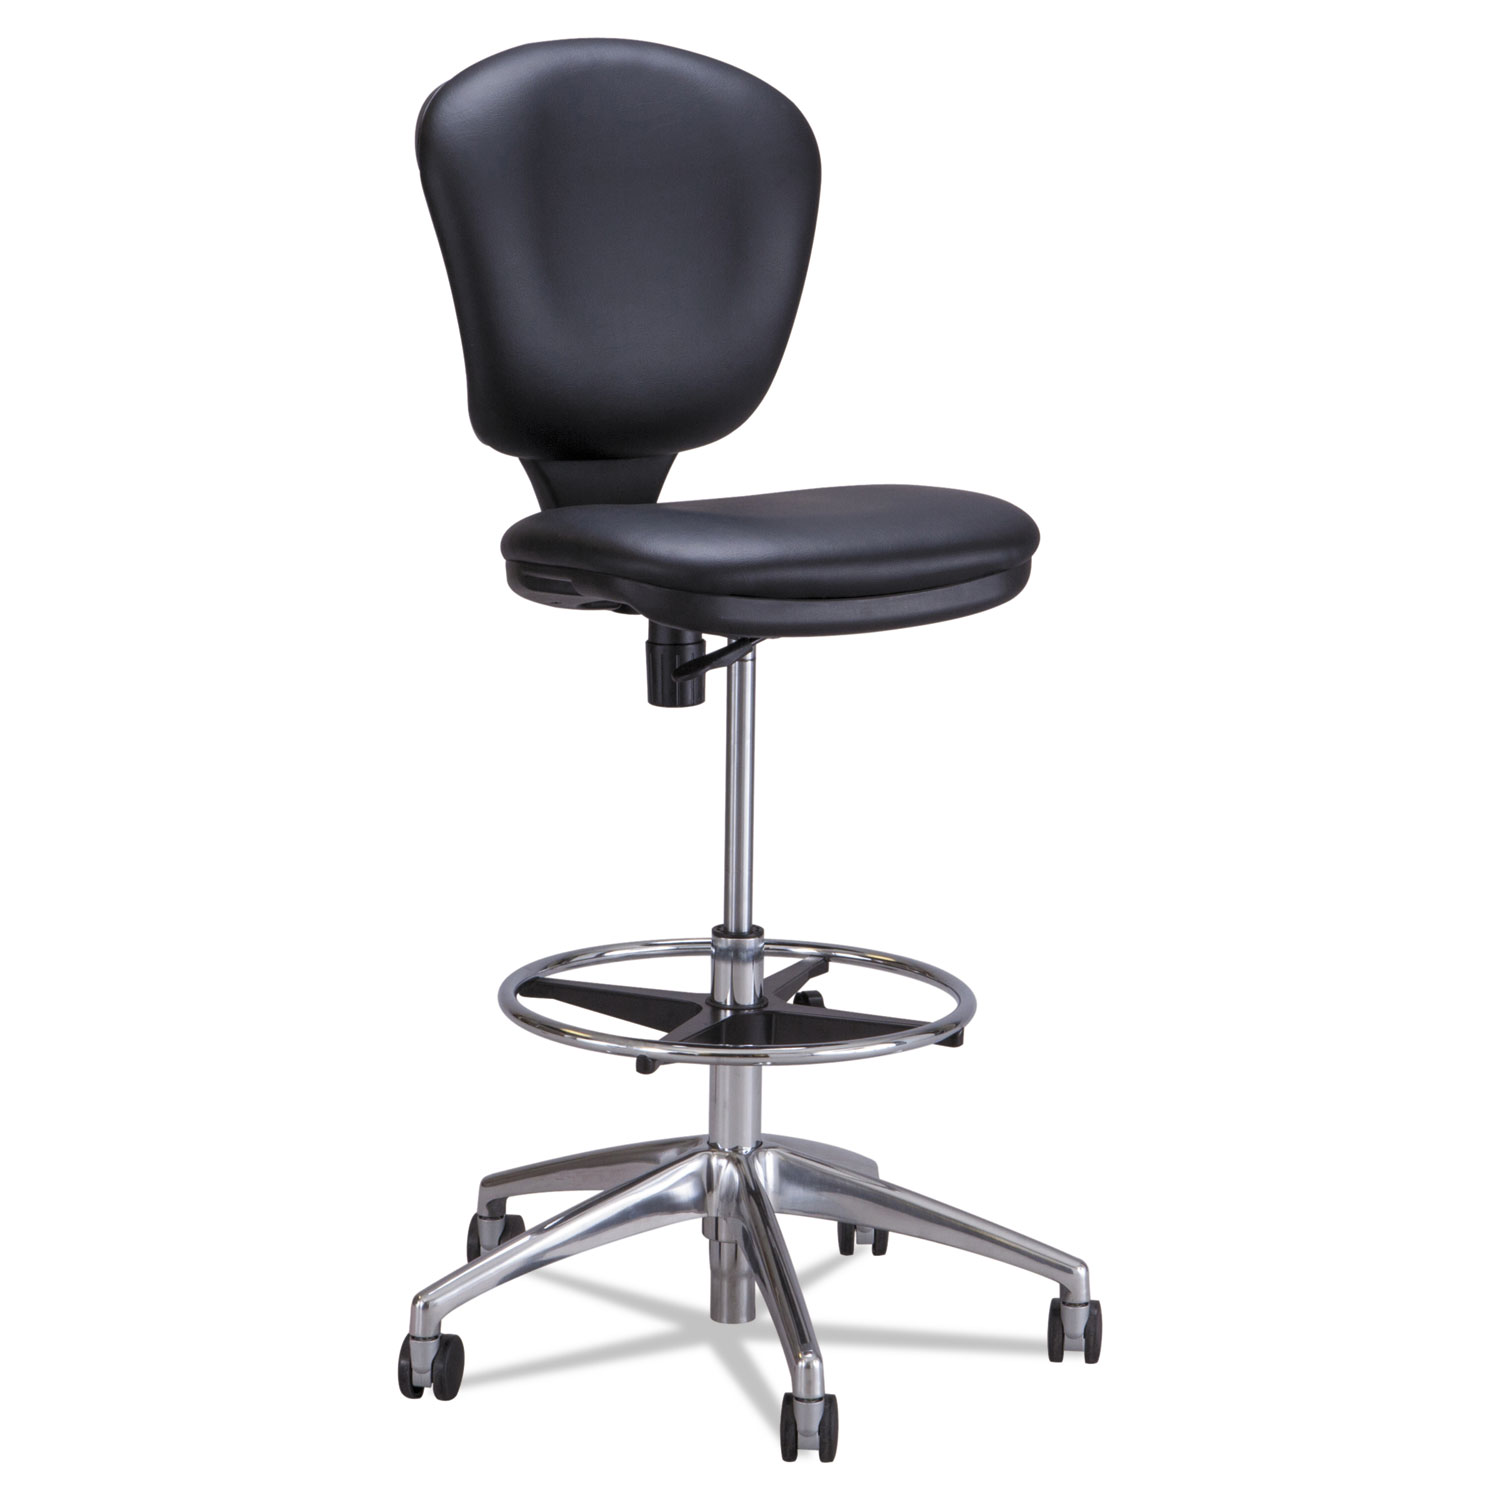  Safco 3442BV Metro Collection Extended-Height Chair, Supports up to 250 lbs., Black Seat/Black Back, Chrome Base (SAF3442BV) 